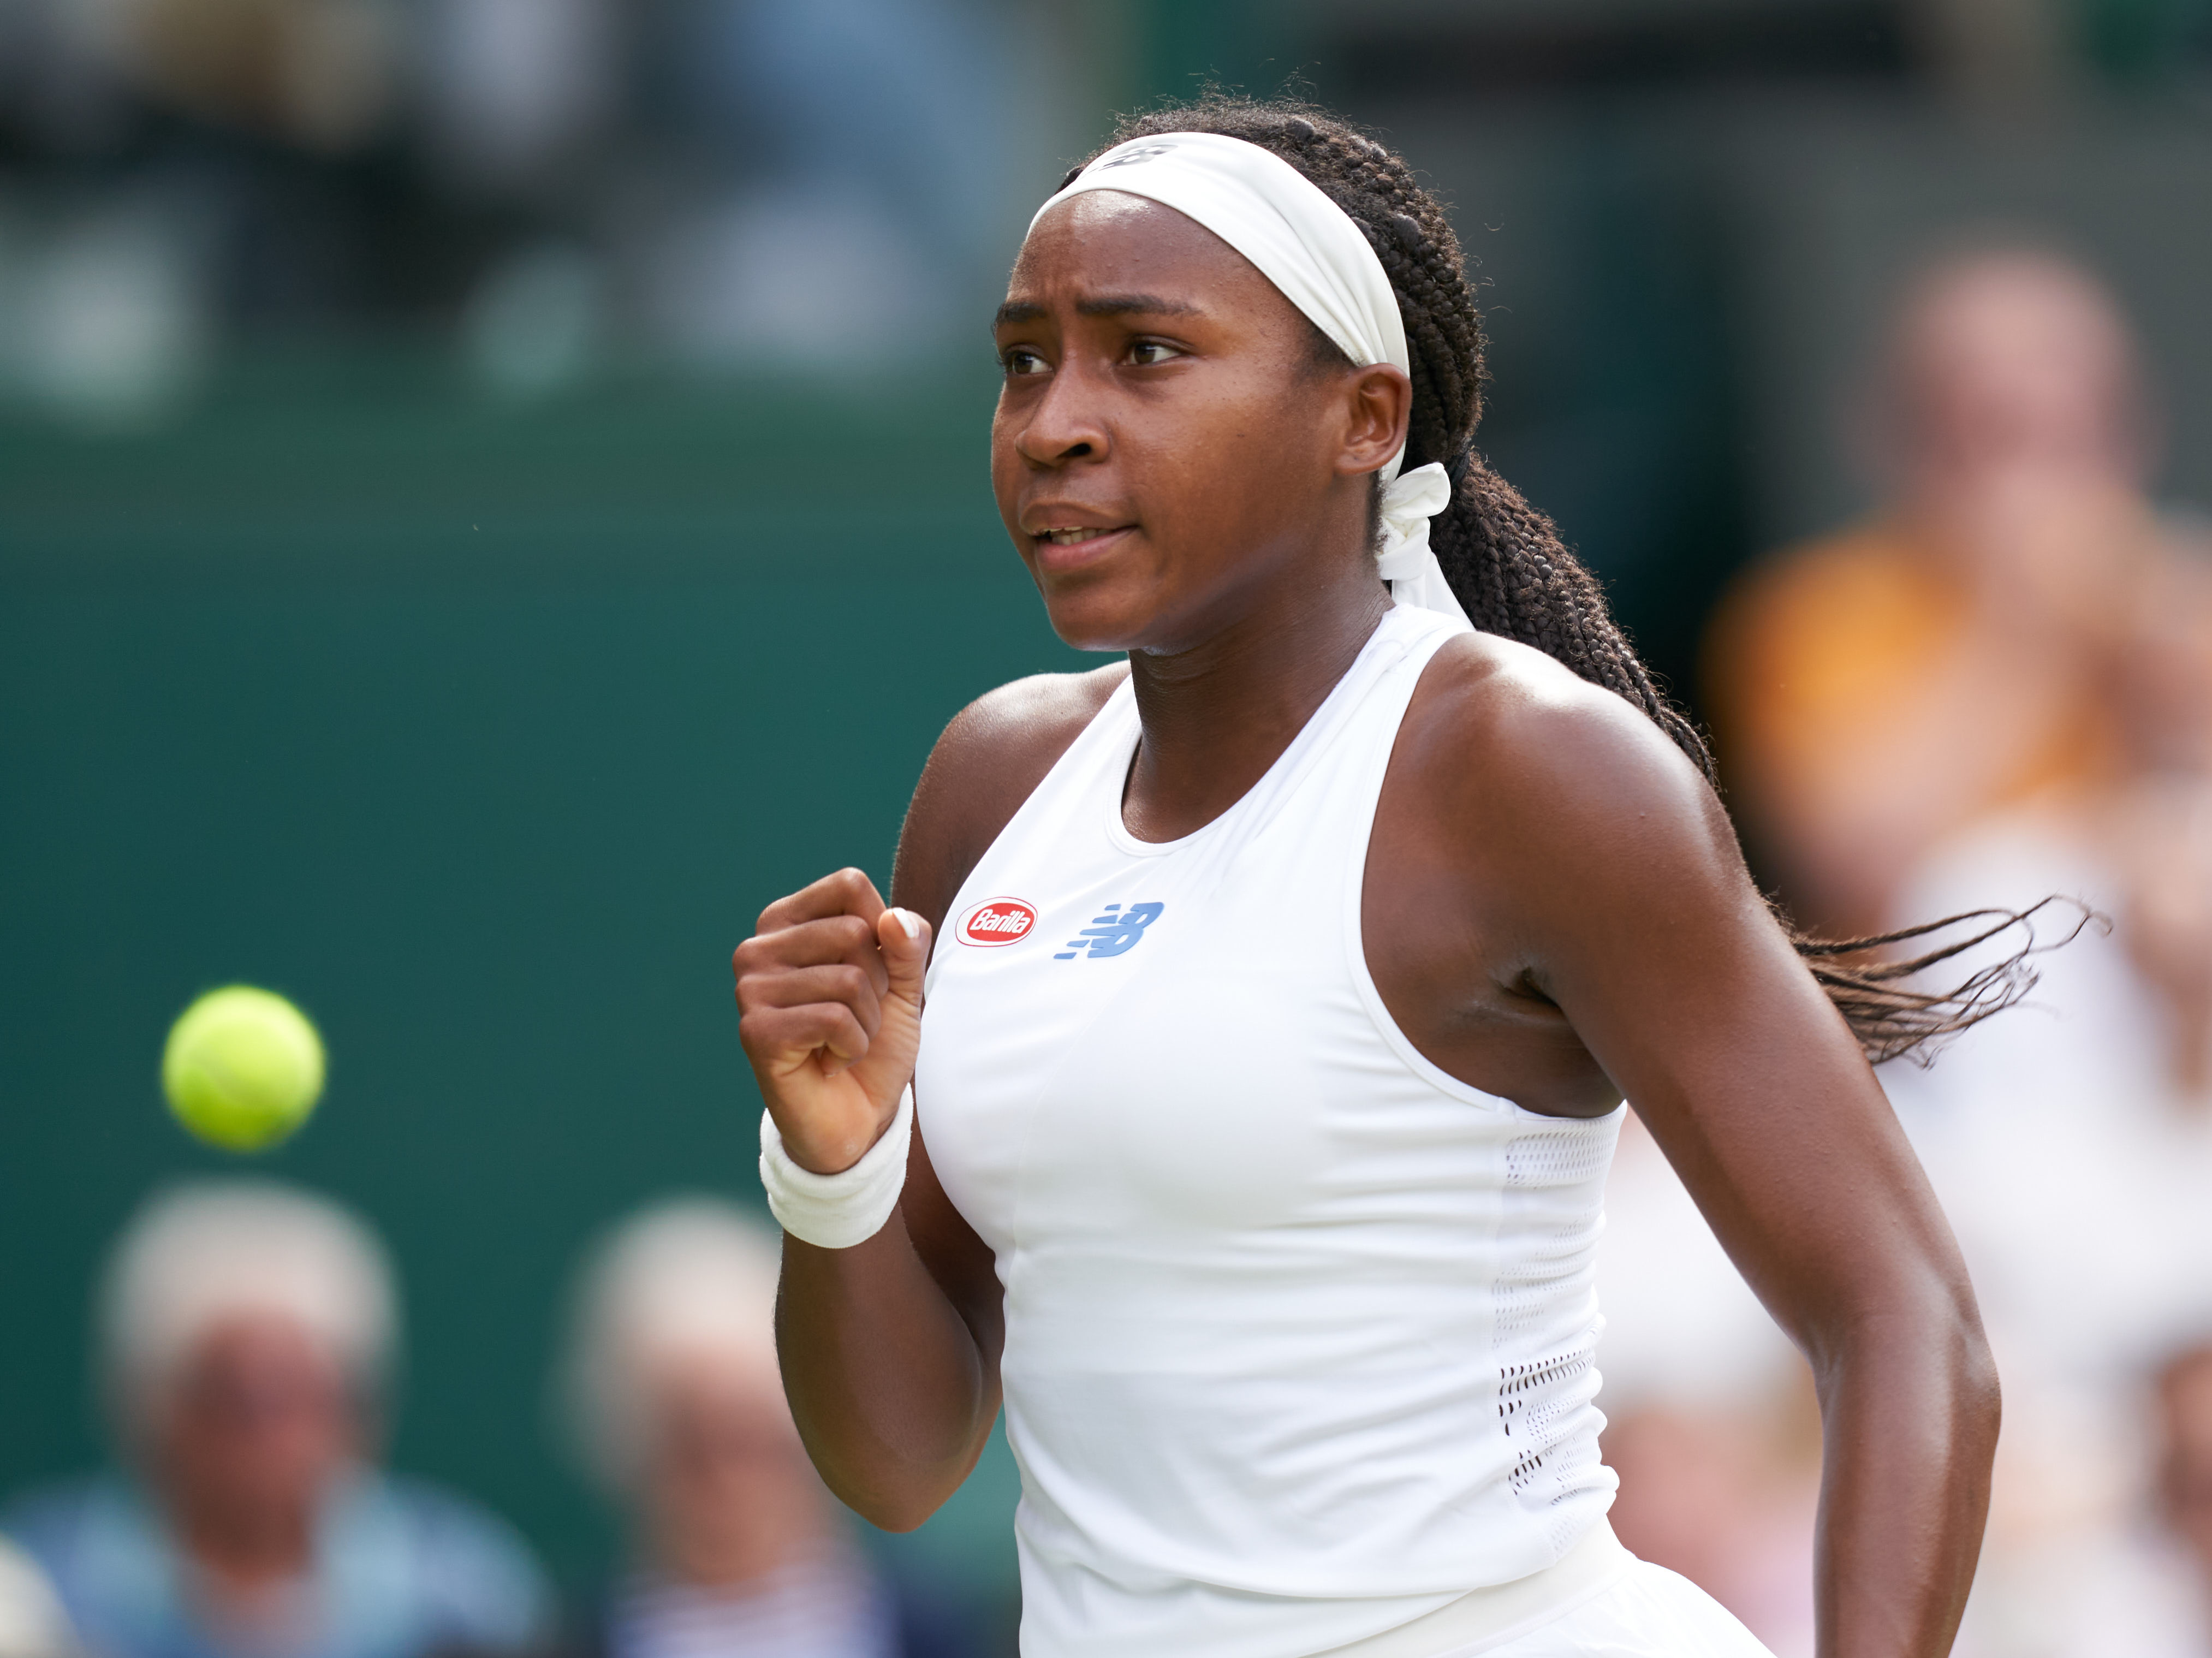 US Teen Tennis Star, Coco Gauff To Miss Tokyo Olympic Over Positive COVID-19 Test